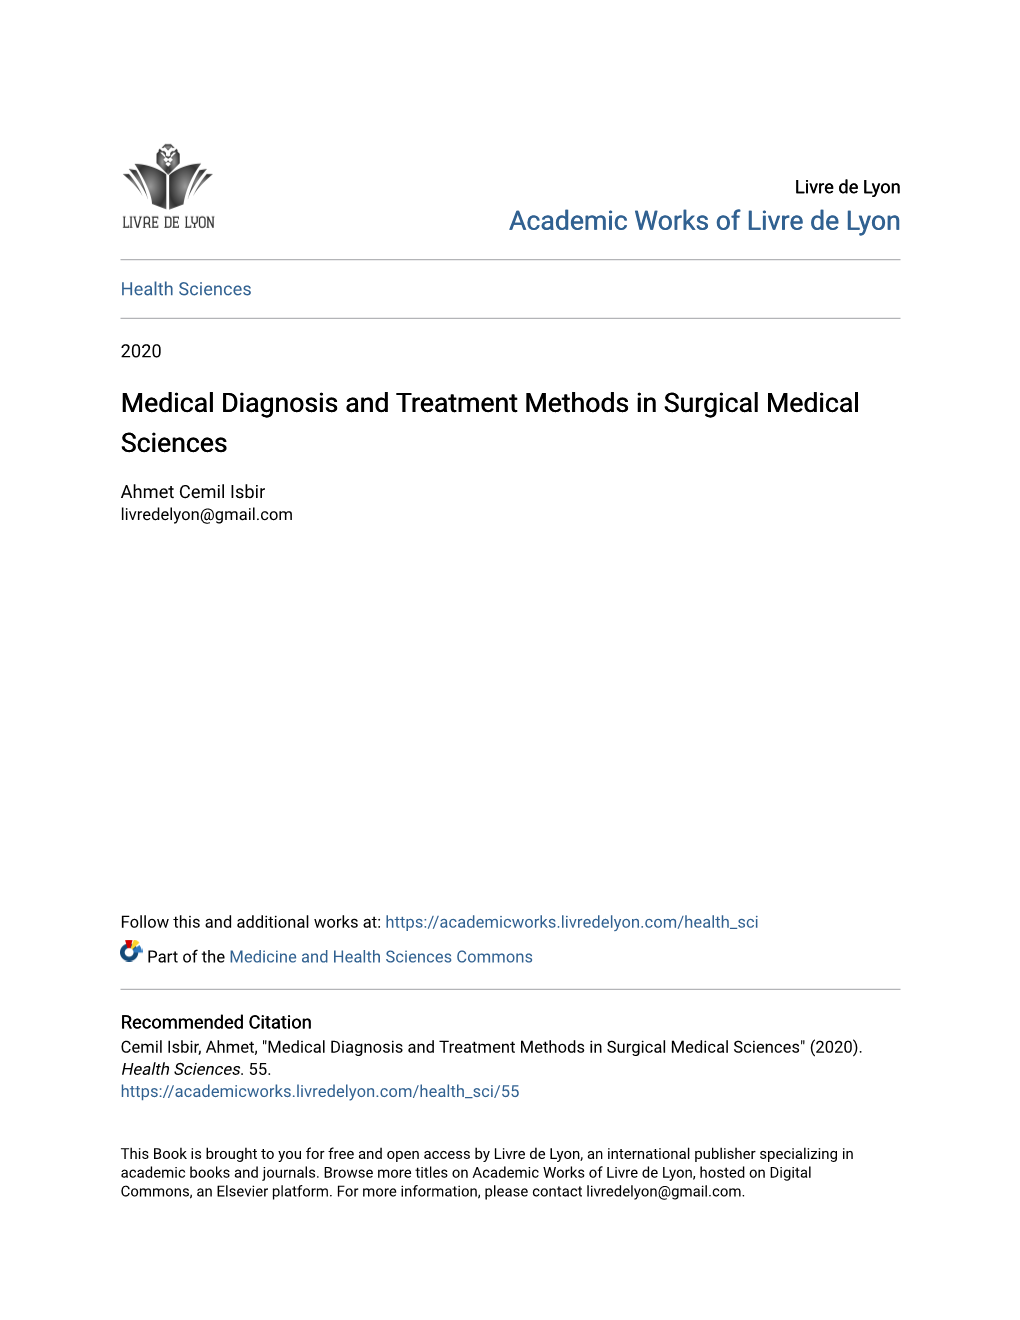 Medical Diagnosis and Treatment Methods in Surgical Medical Sciences